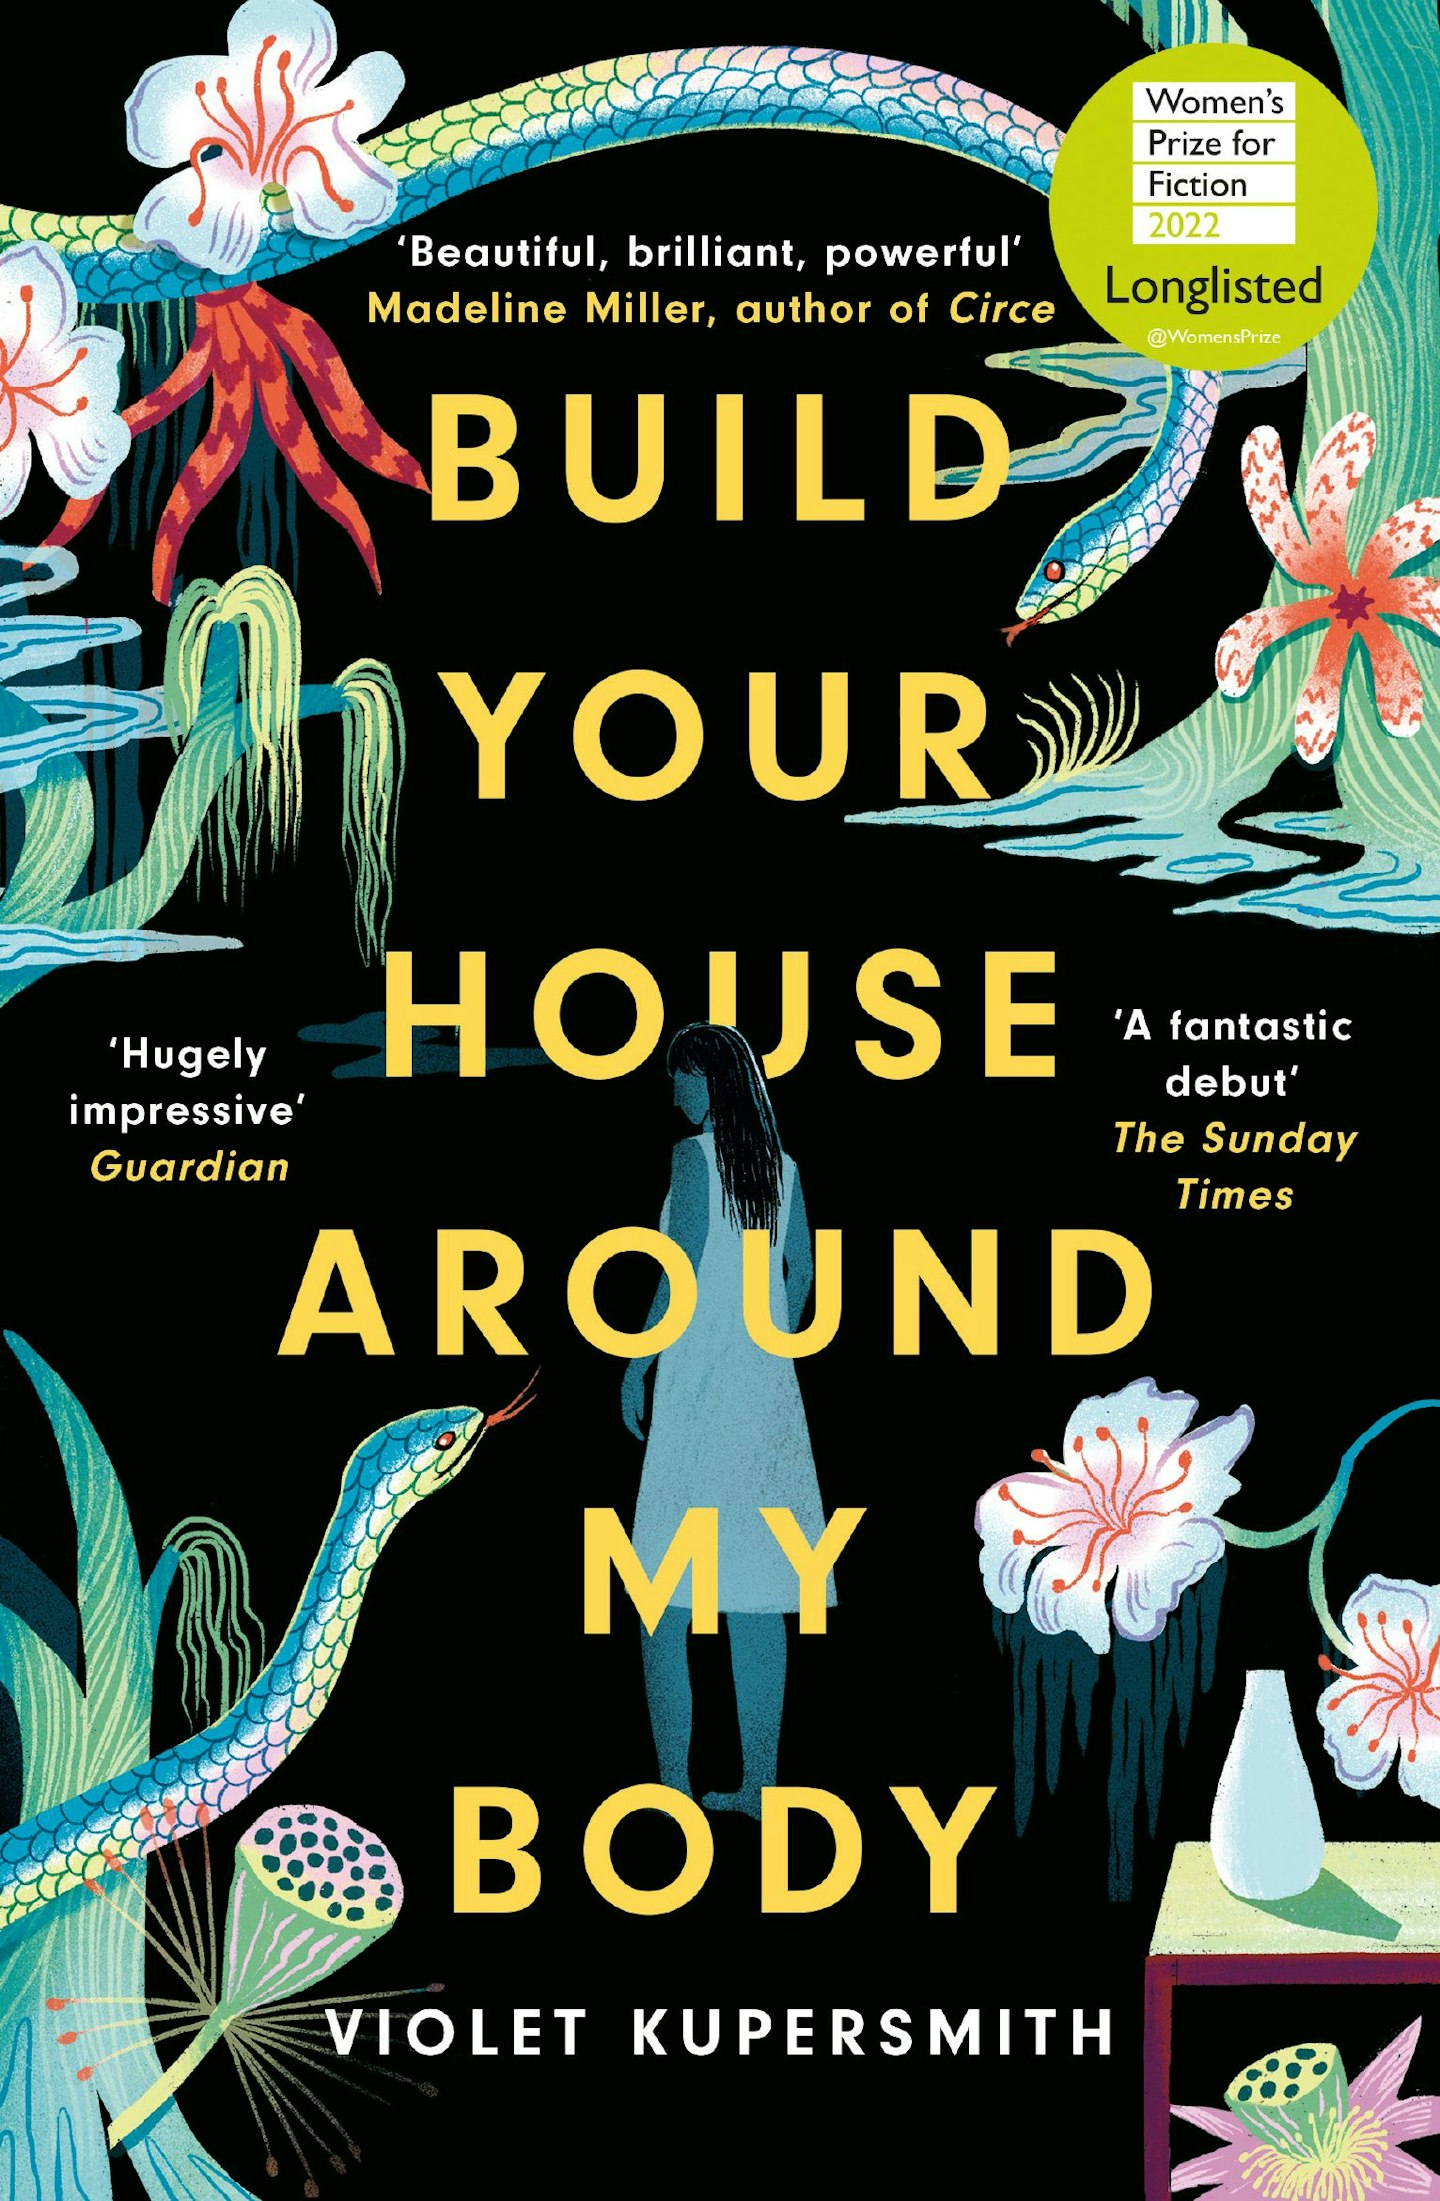 BUILD YOUR HOUSE AROUND BY BODY by Violet Kupersmith